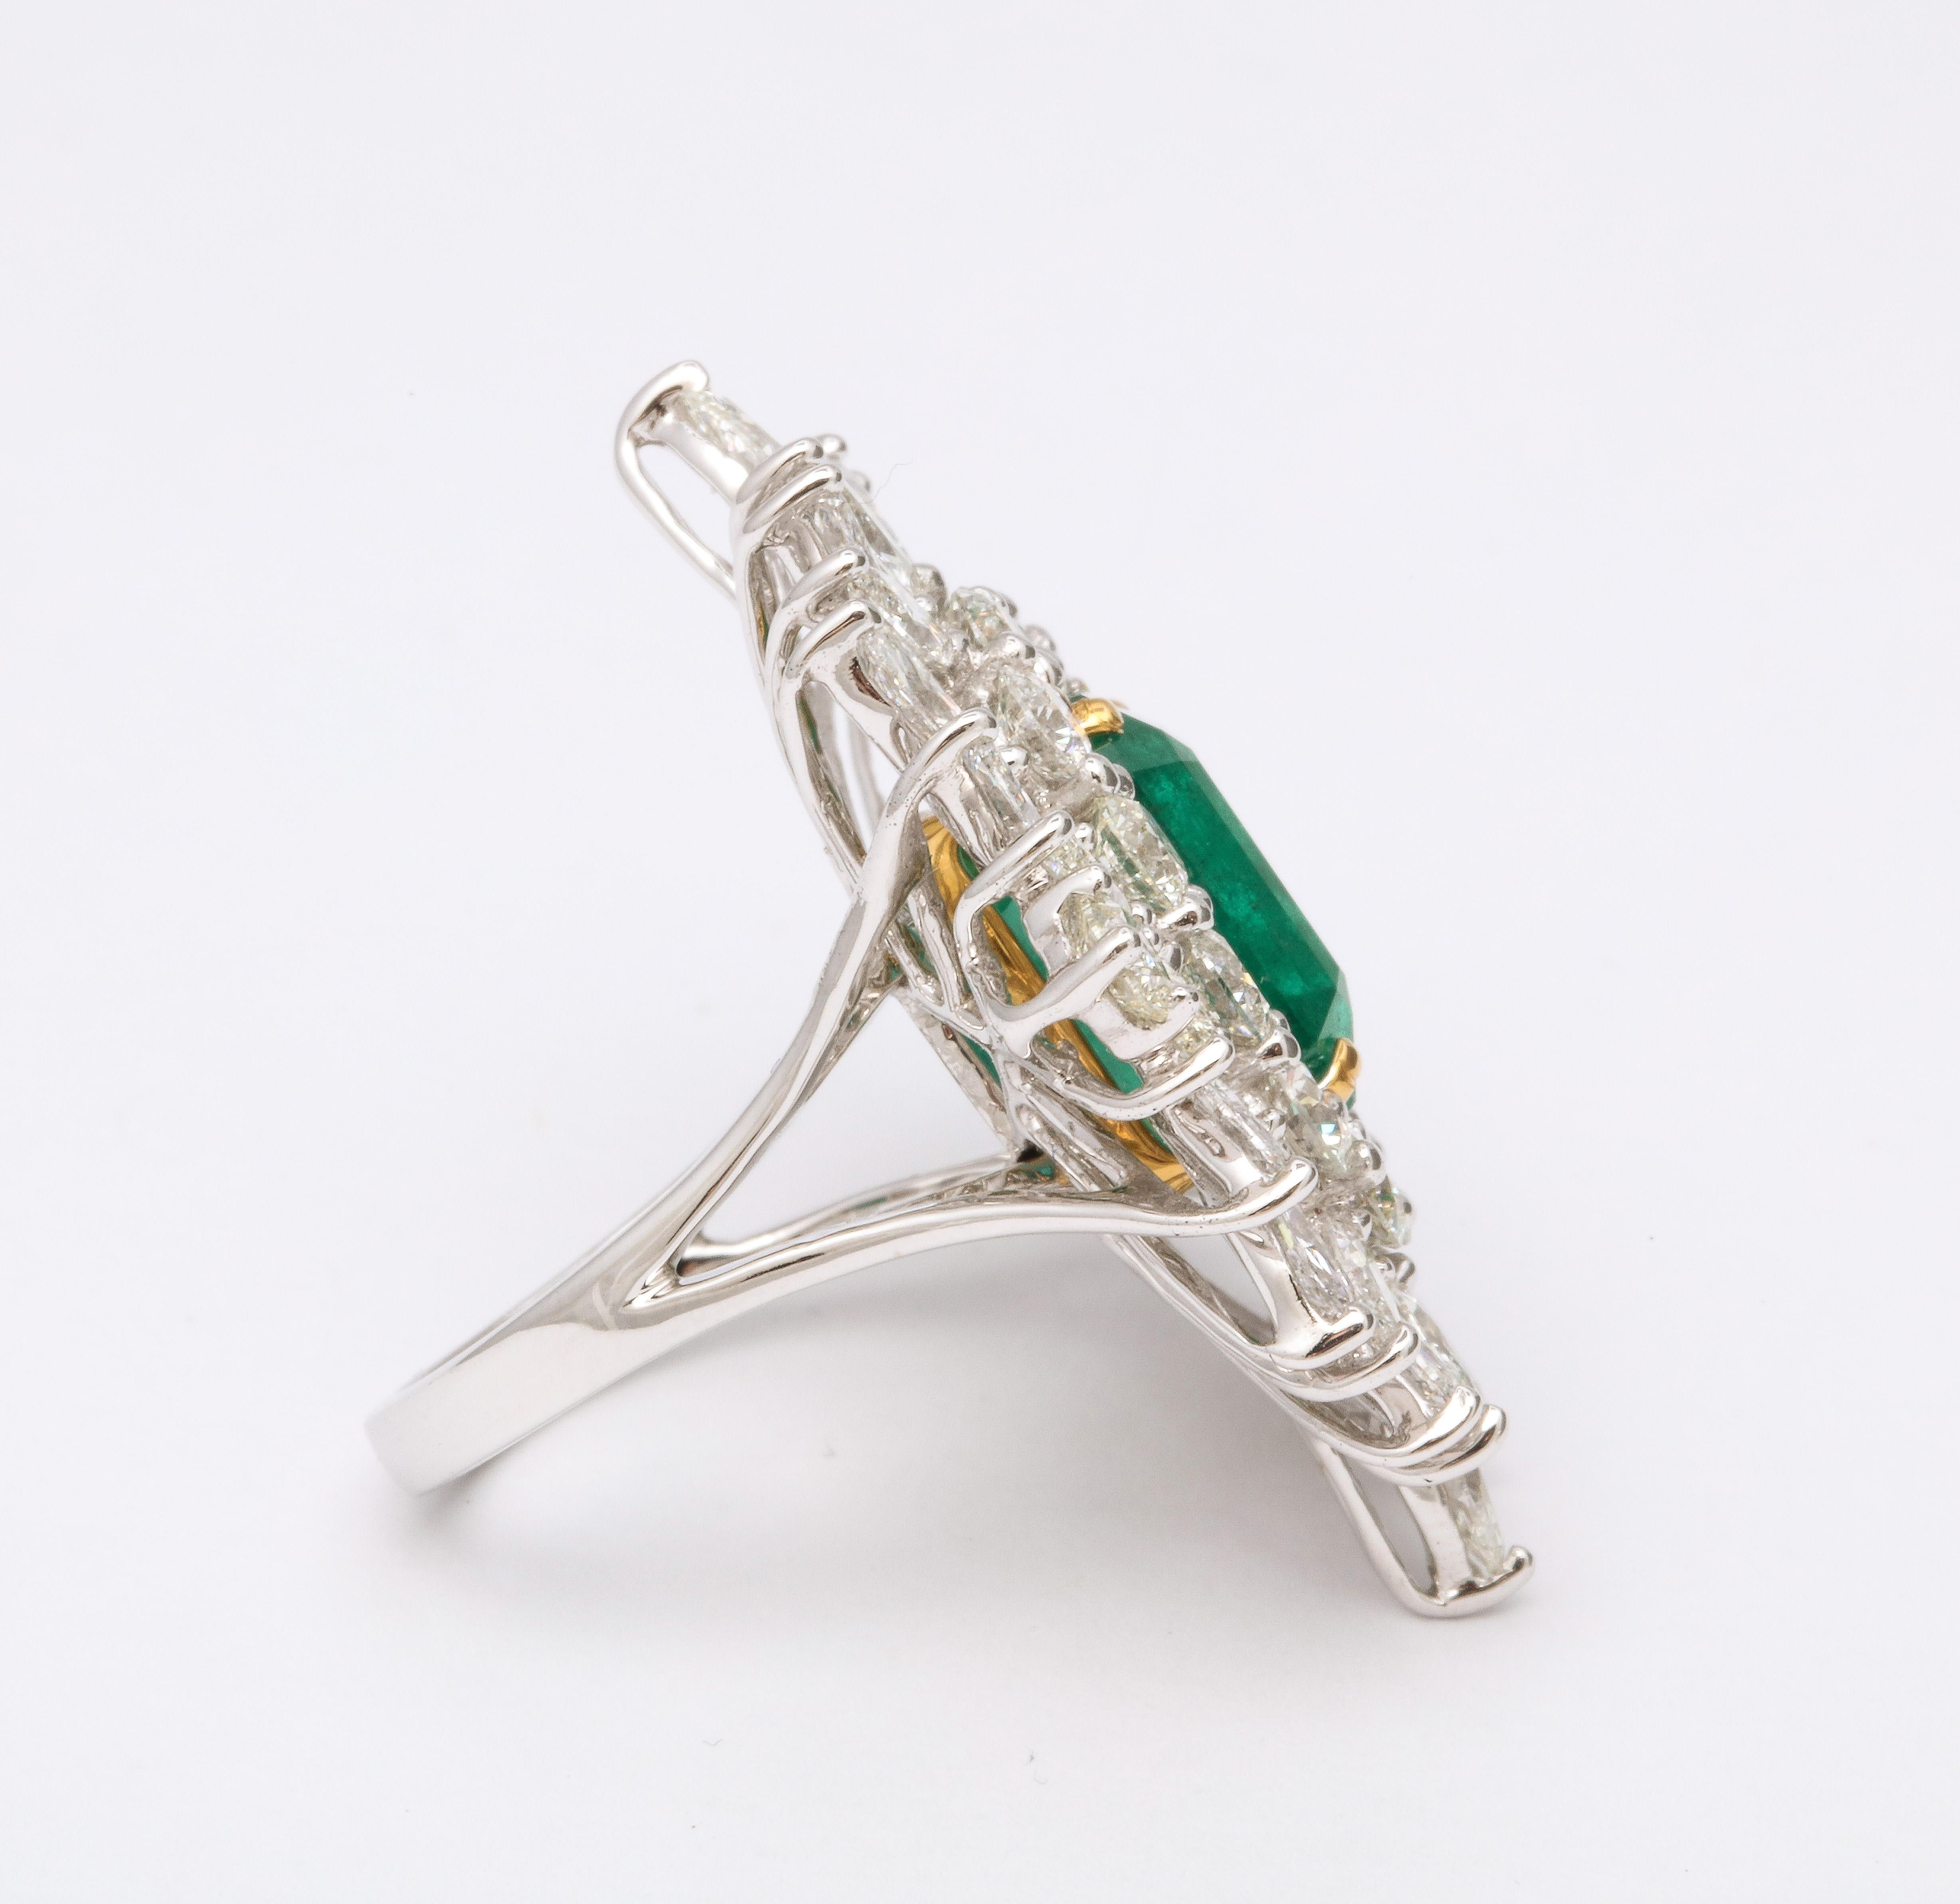 Emerald Cut Emerald and Diamond Cocktail Ring